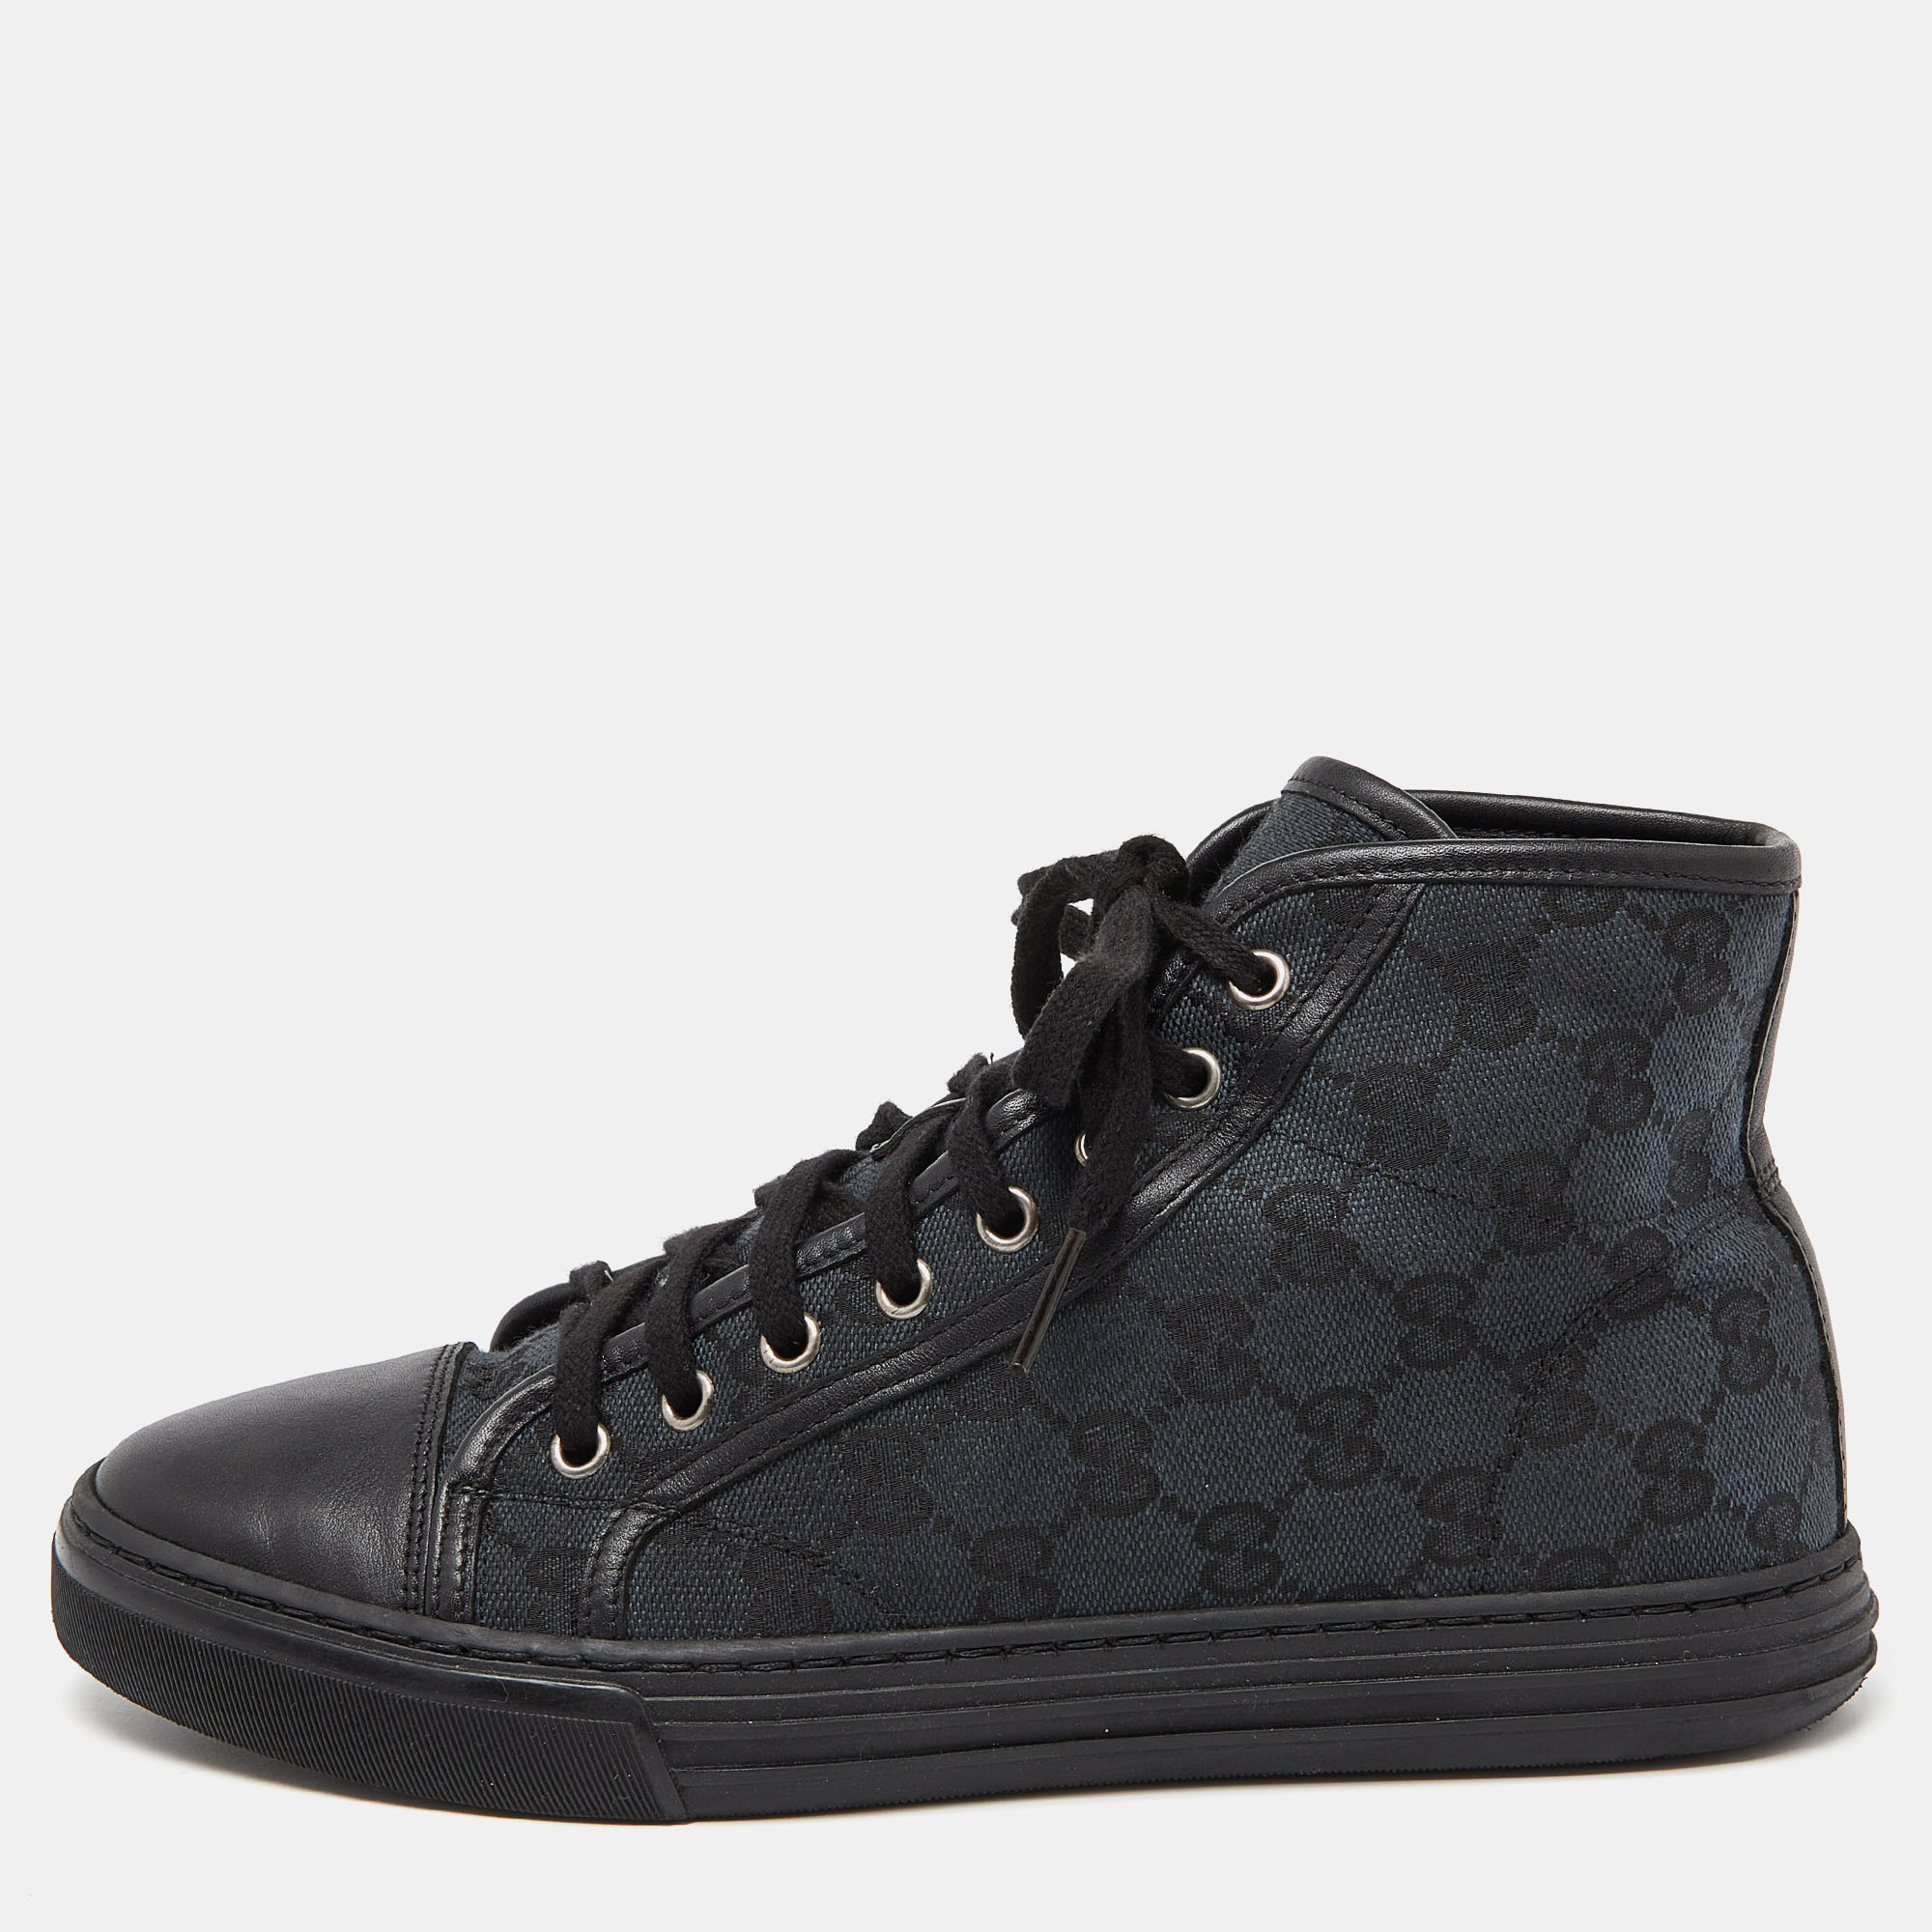 Gucci black gg canvas and leather brooklyn high top sneakers size 37.5